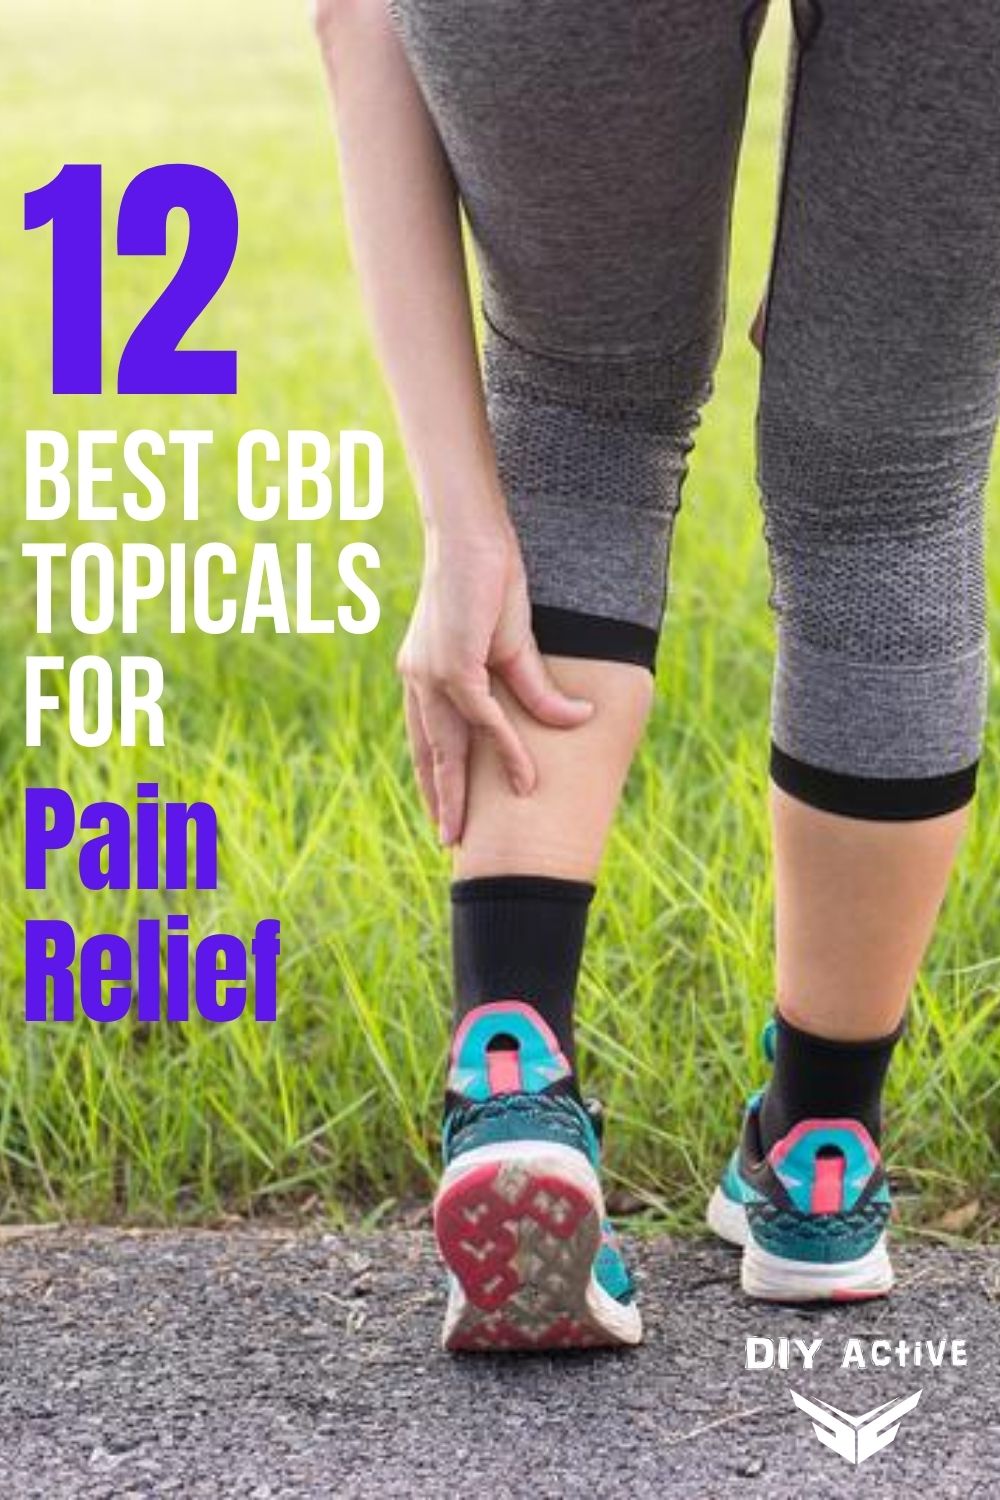 12 Best CBD Topicals for Pain Relief and Muscle Relaxation